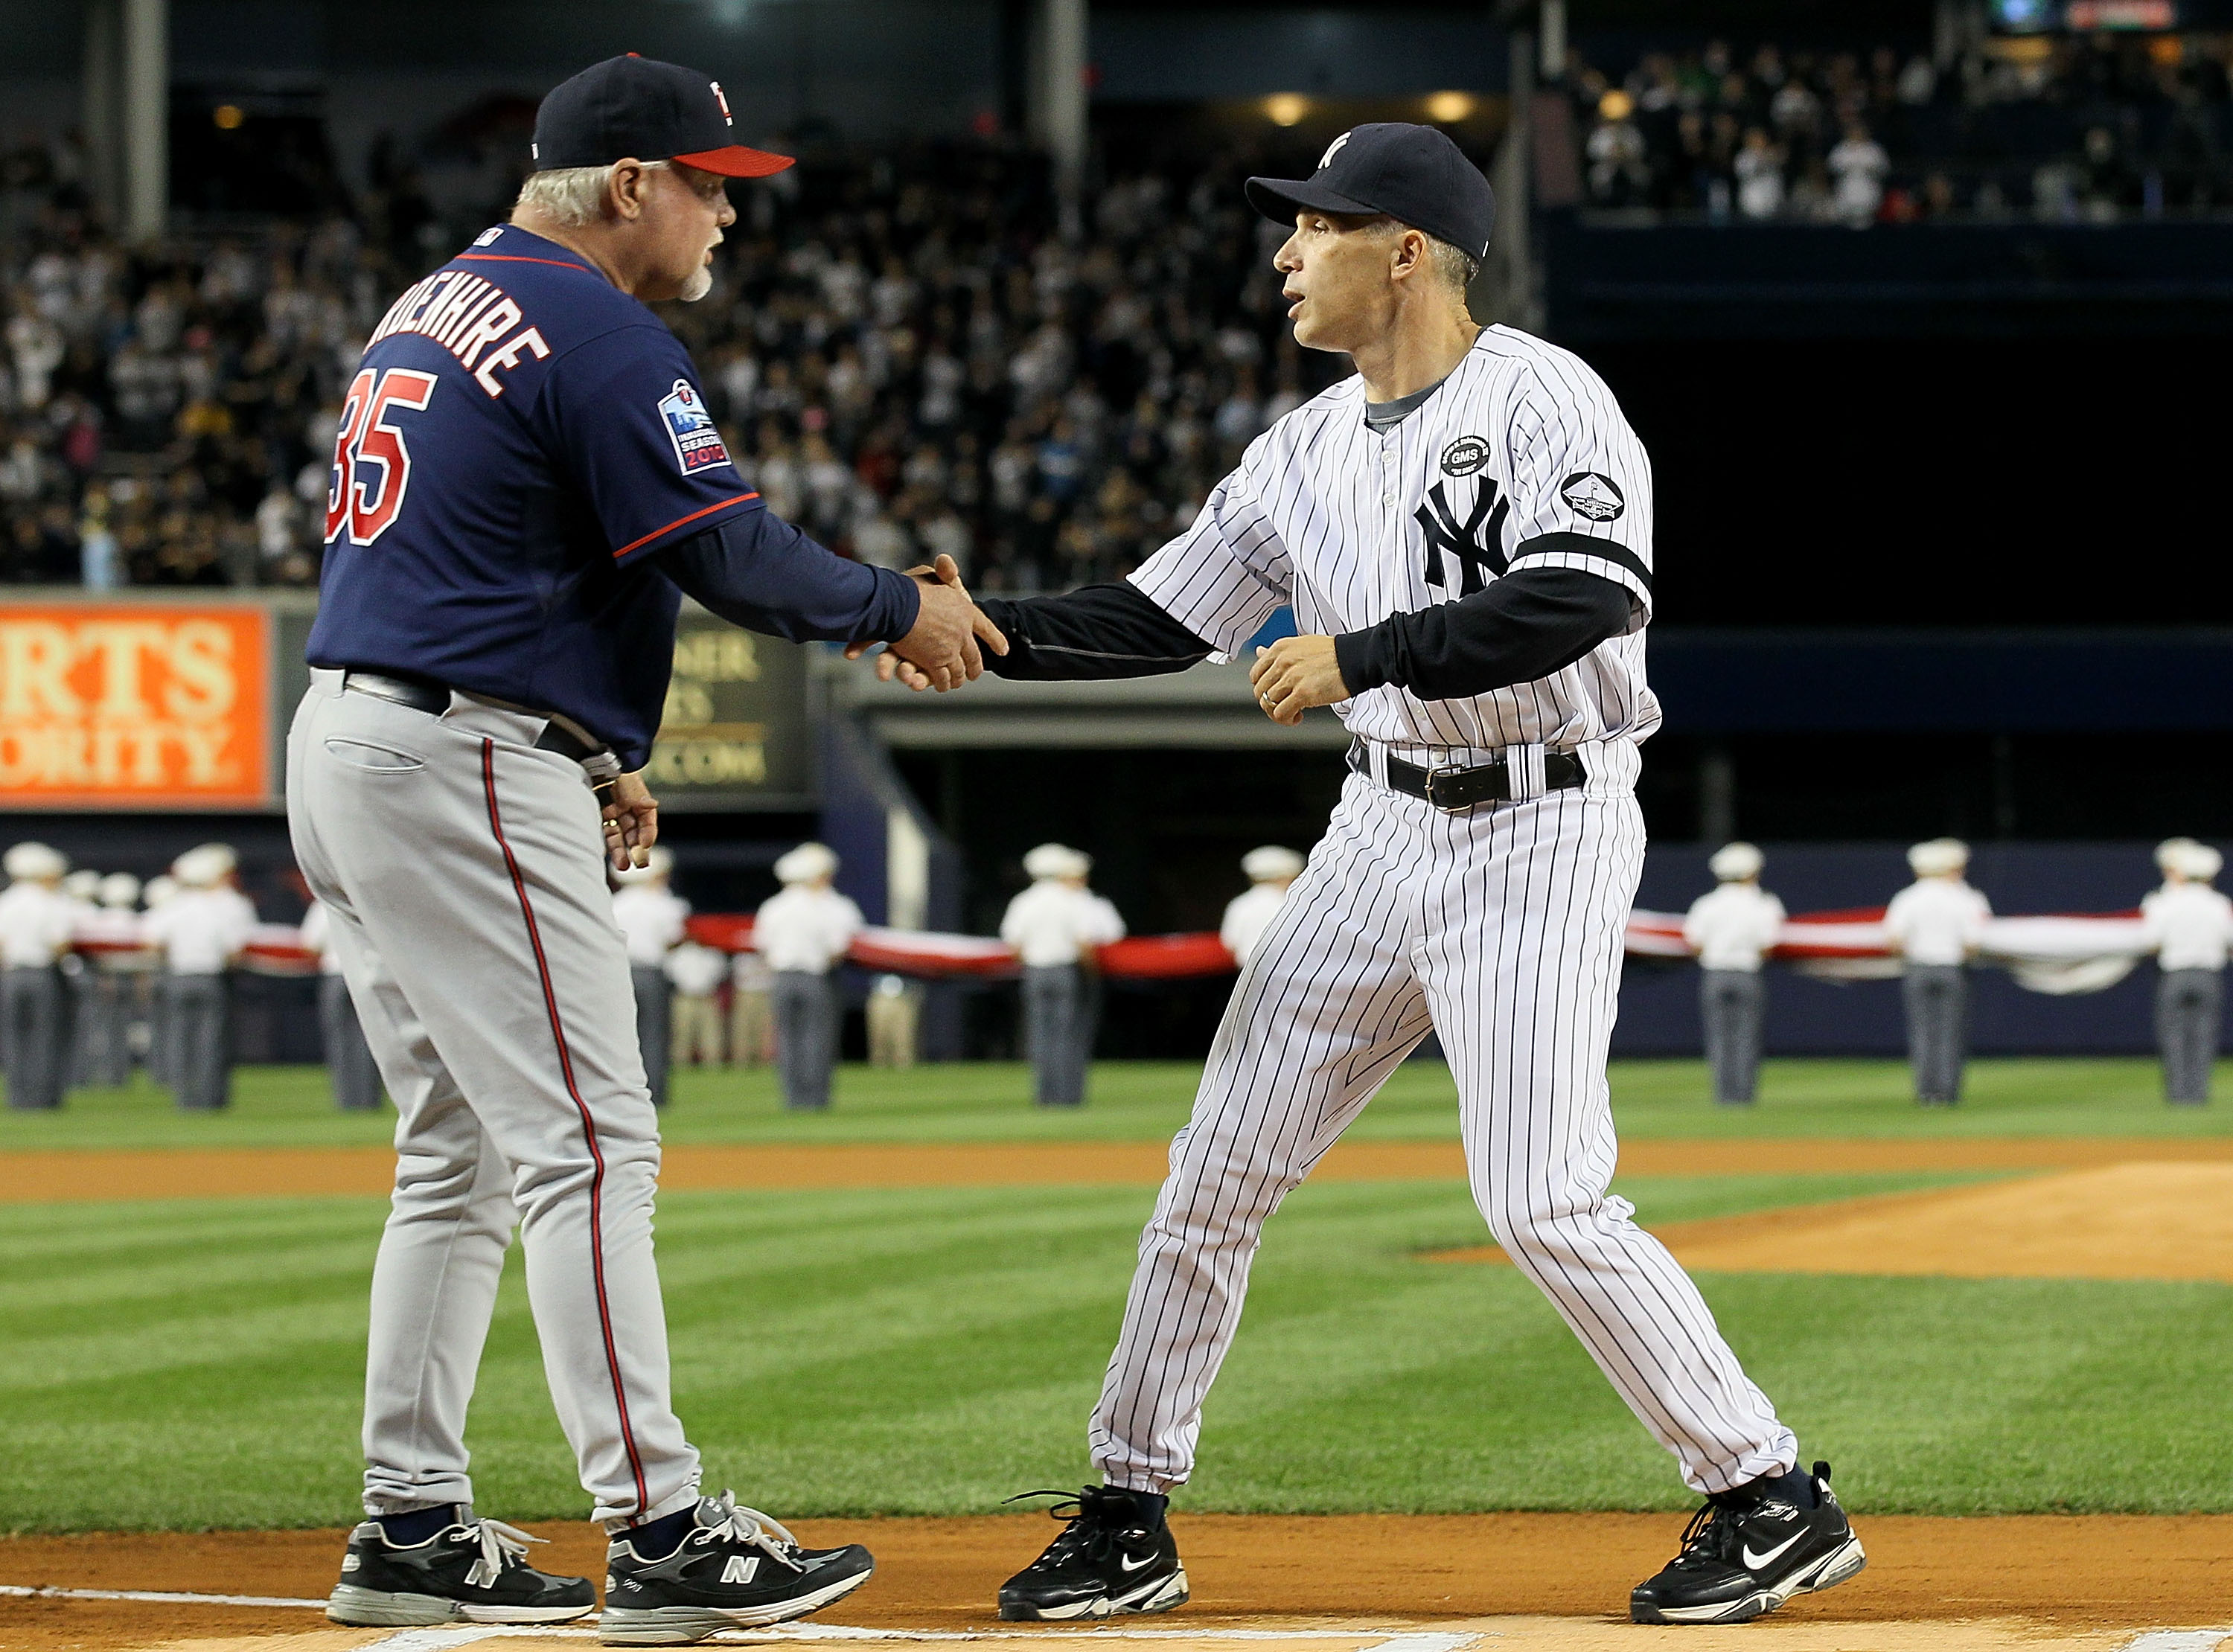 NEW YORK - OCTOBER 09:  Manager Joe Girardi #28 (R) of the New York Yankees greets manager Ron Gardenhire #35 of the Minnesota Twins prior to Game Three of the ALDS part of the 2010 MLB Playoffs at Yankee Stadium on October 9, 2010 in the Bronx borough of